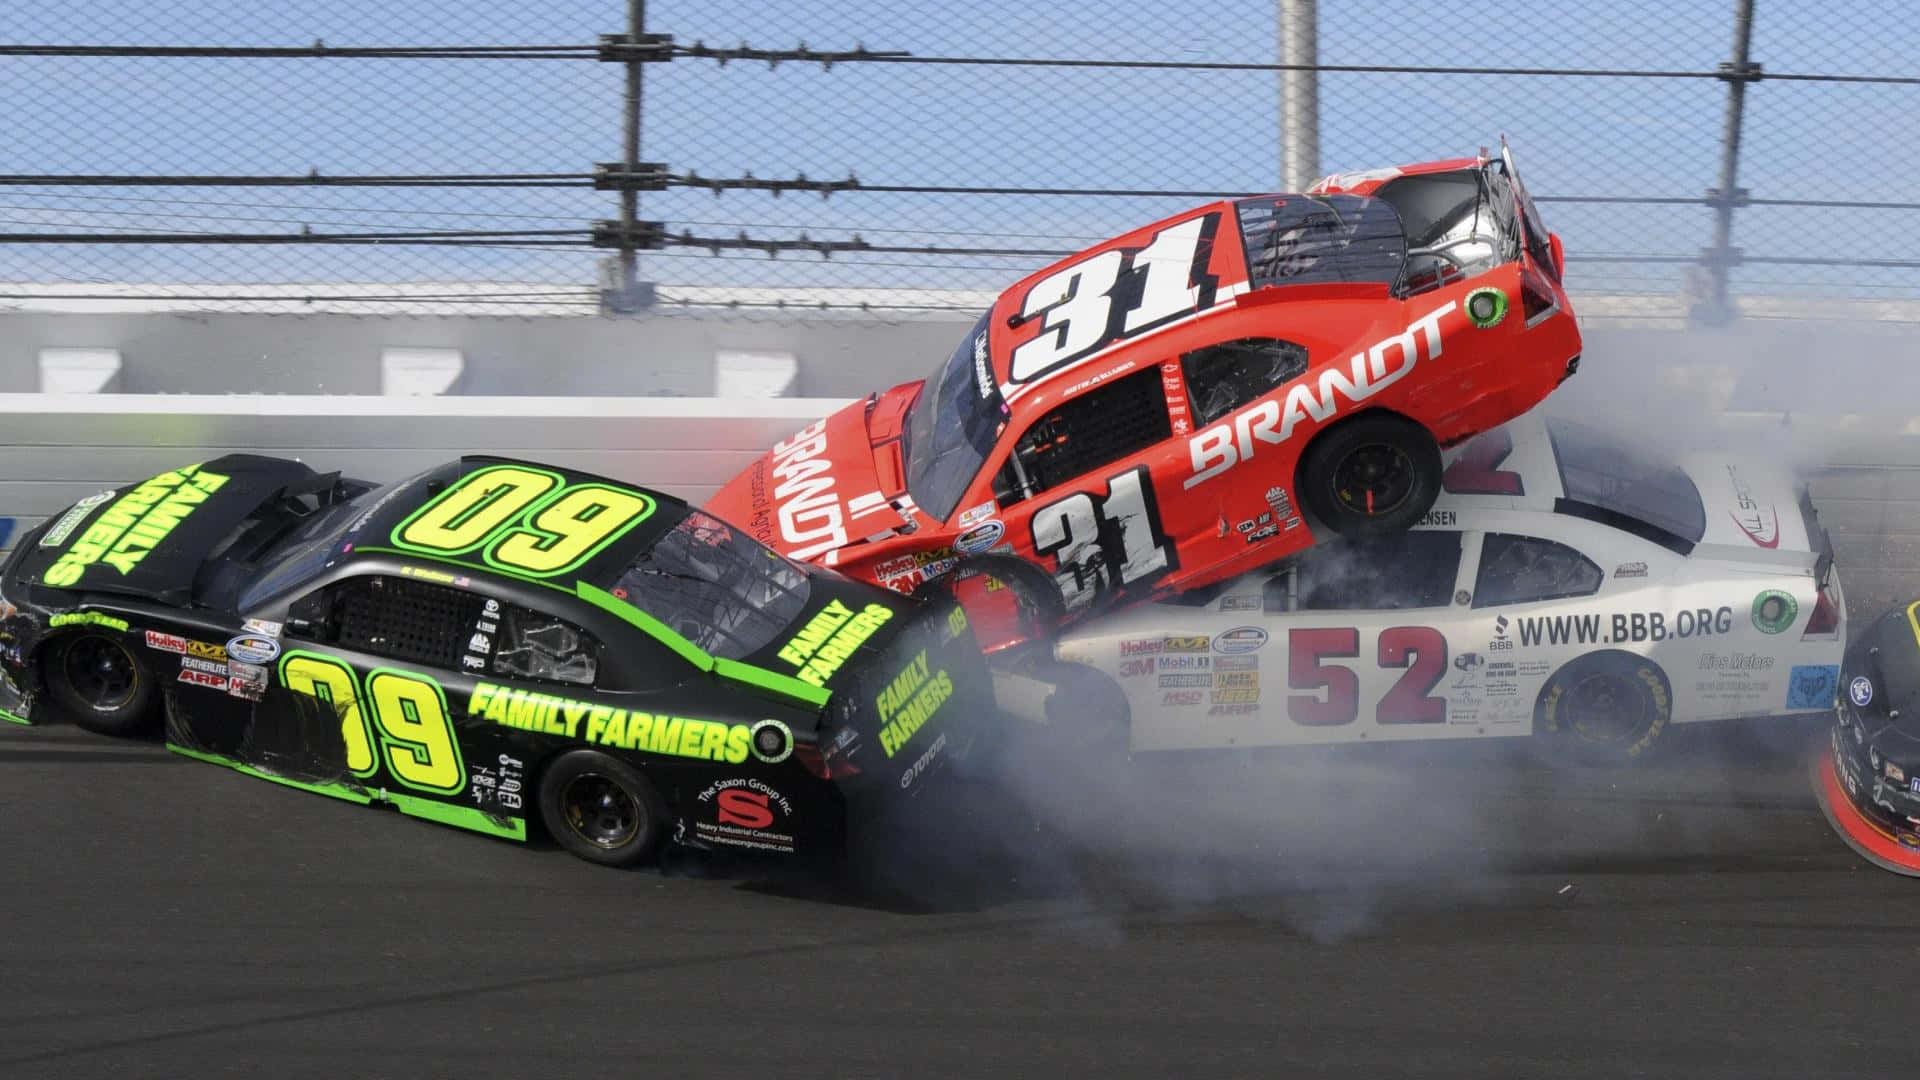 High-speed Action At The Nascar Racing Event Background